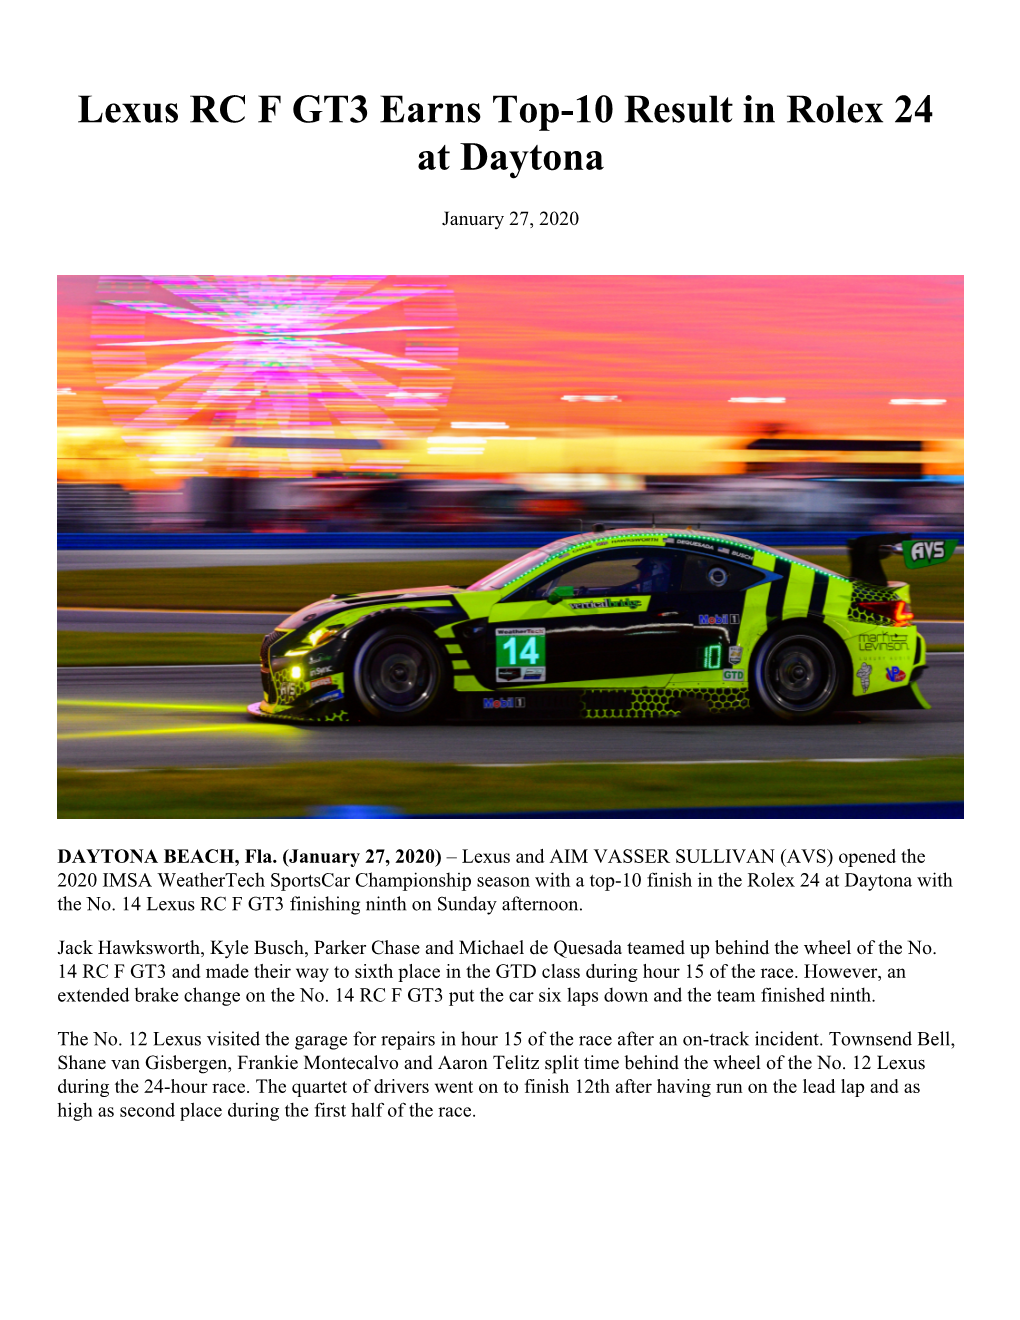 Lexus RC F GT3 Earns Top-10 Result in Rolex 24 at Daytona